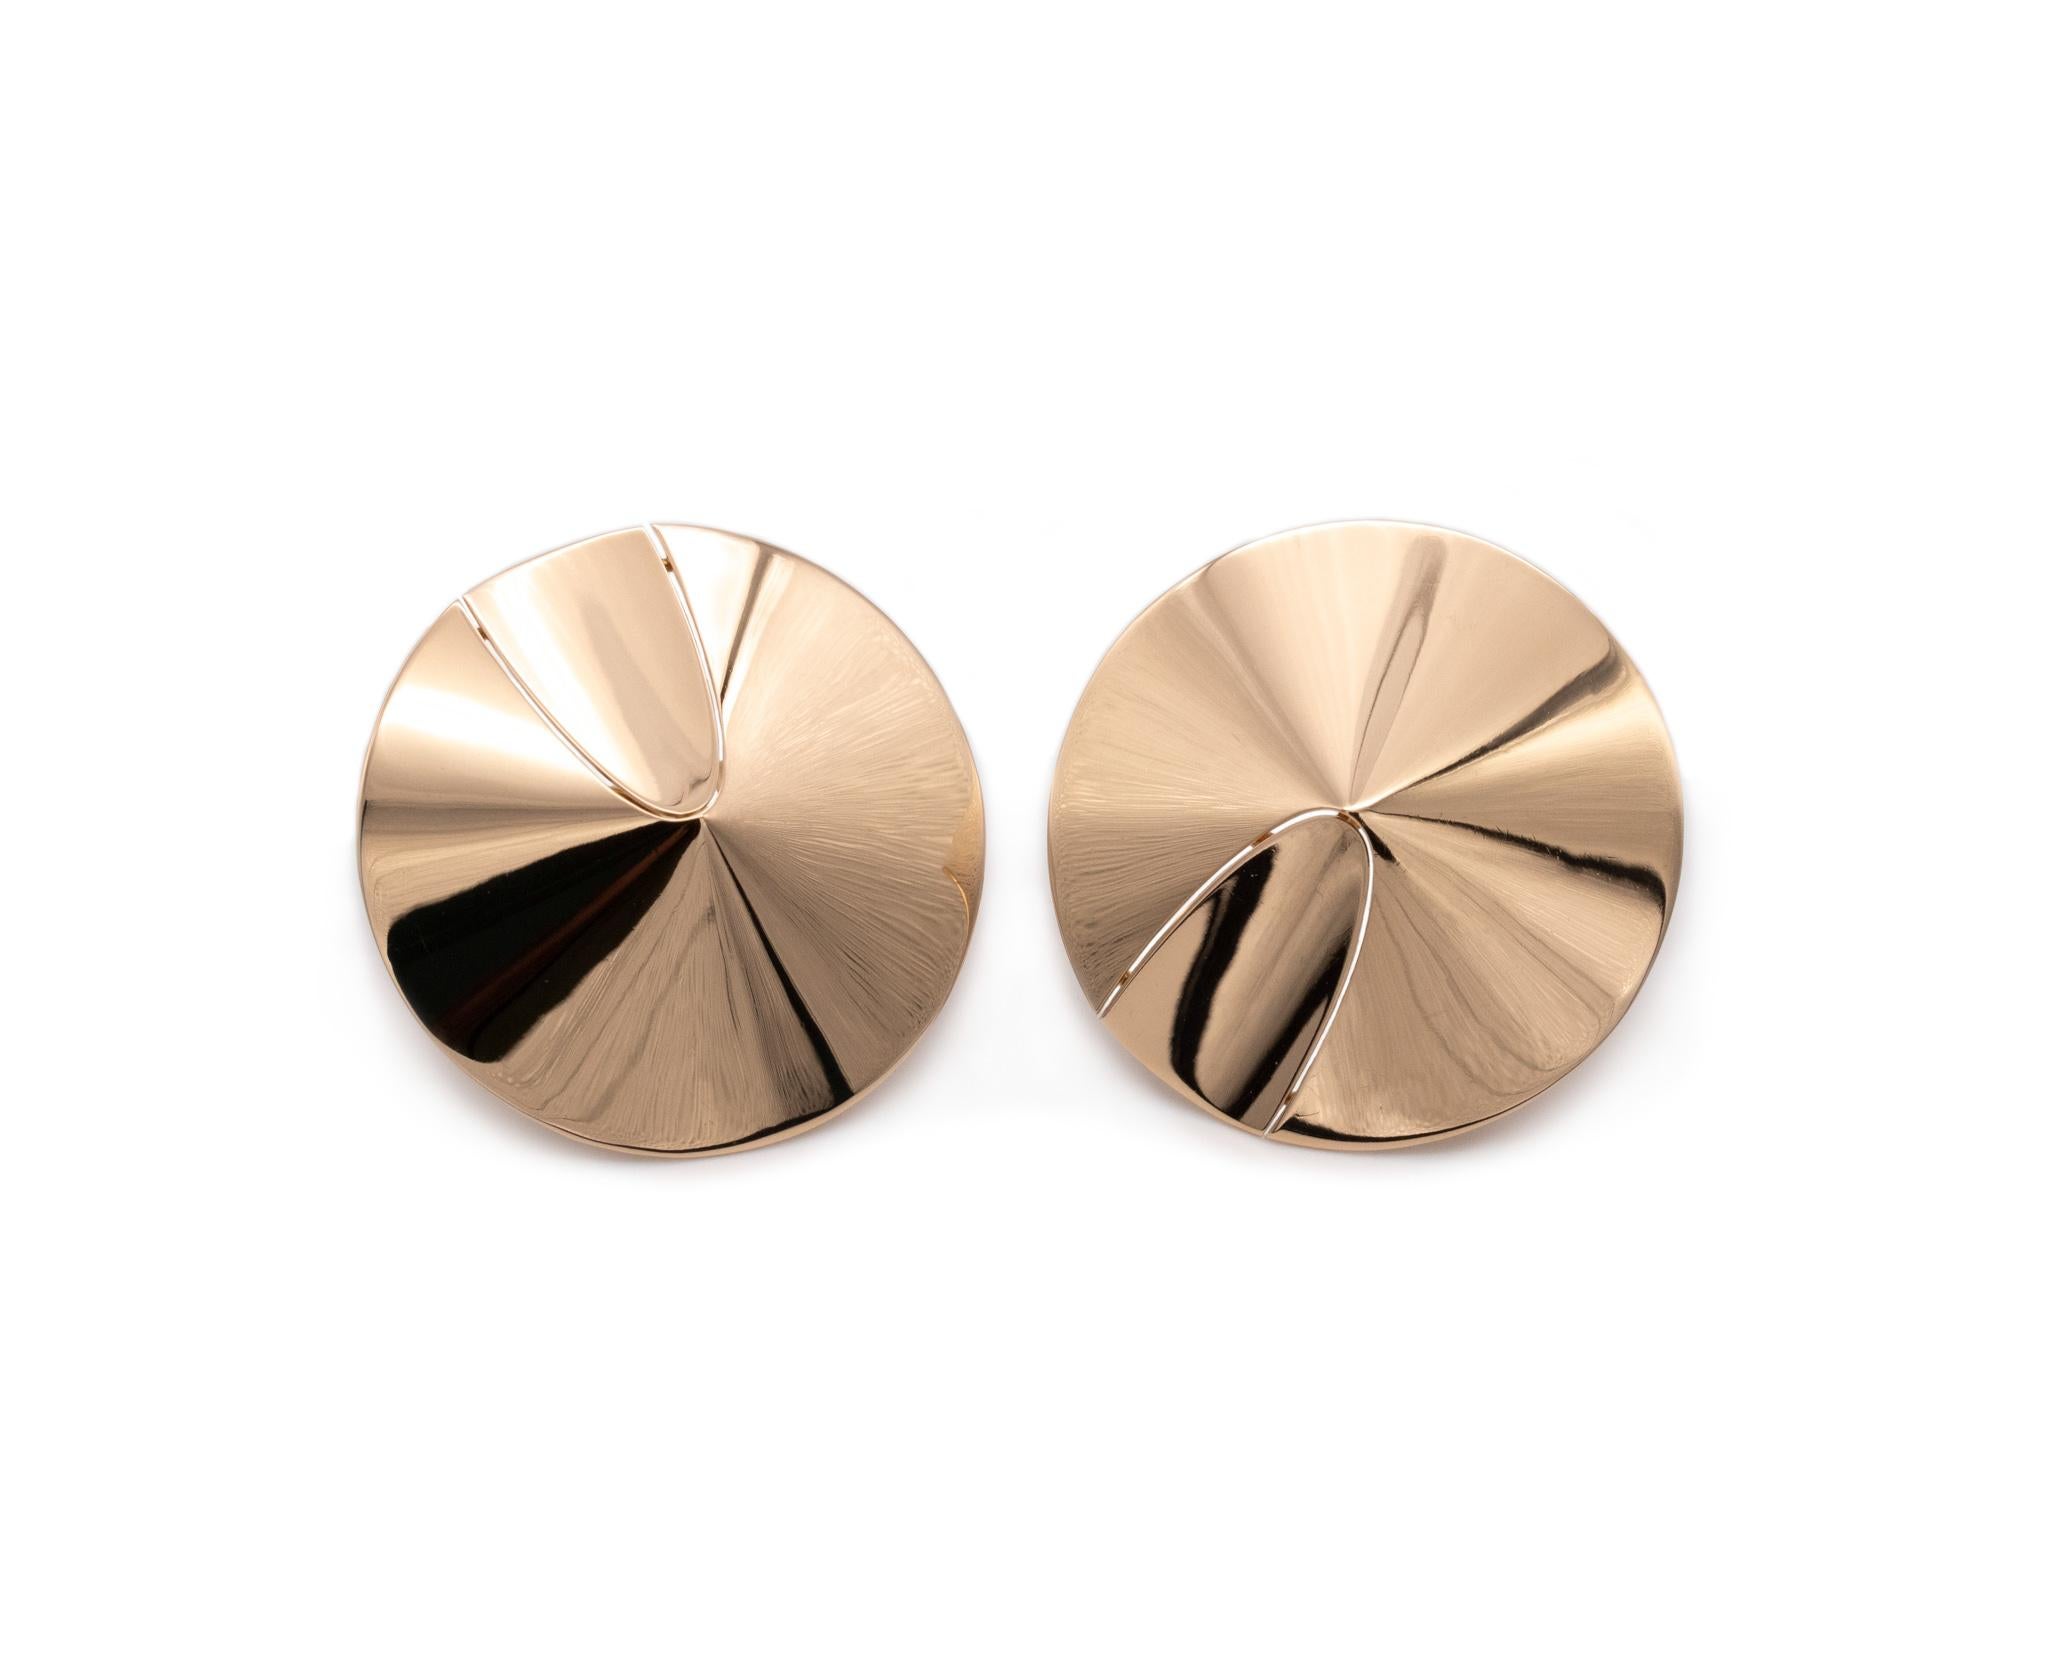 A clips-earrings designed by Kurt Aepli (1914-2002) for Trudel. 

Very rare vintage, one-of-a-kind pieces created back in the 1970's by Kurt Aepli in Zurich, Switzerland. This geometric clip-earrings was crafted in solid yellow gold of 18 karats,